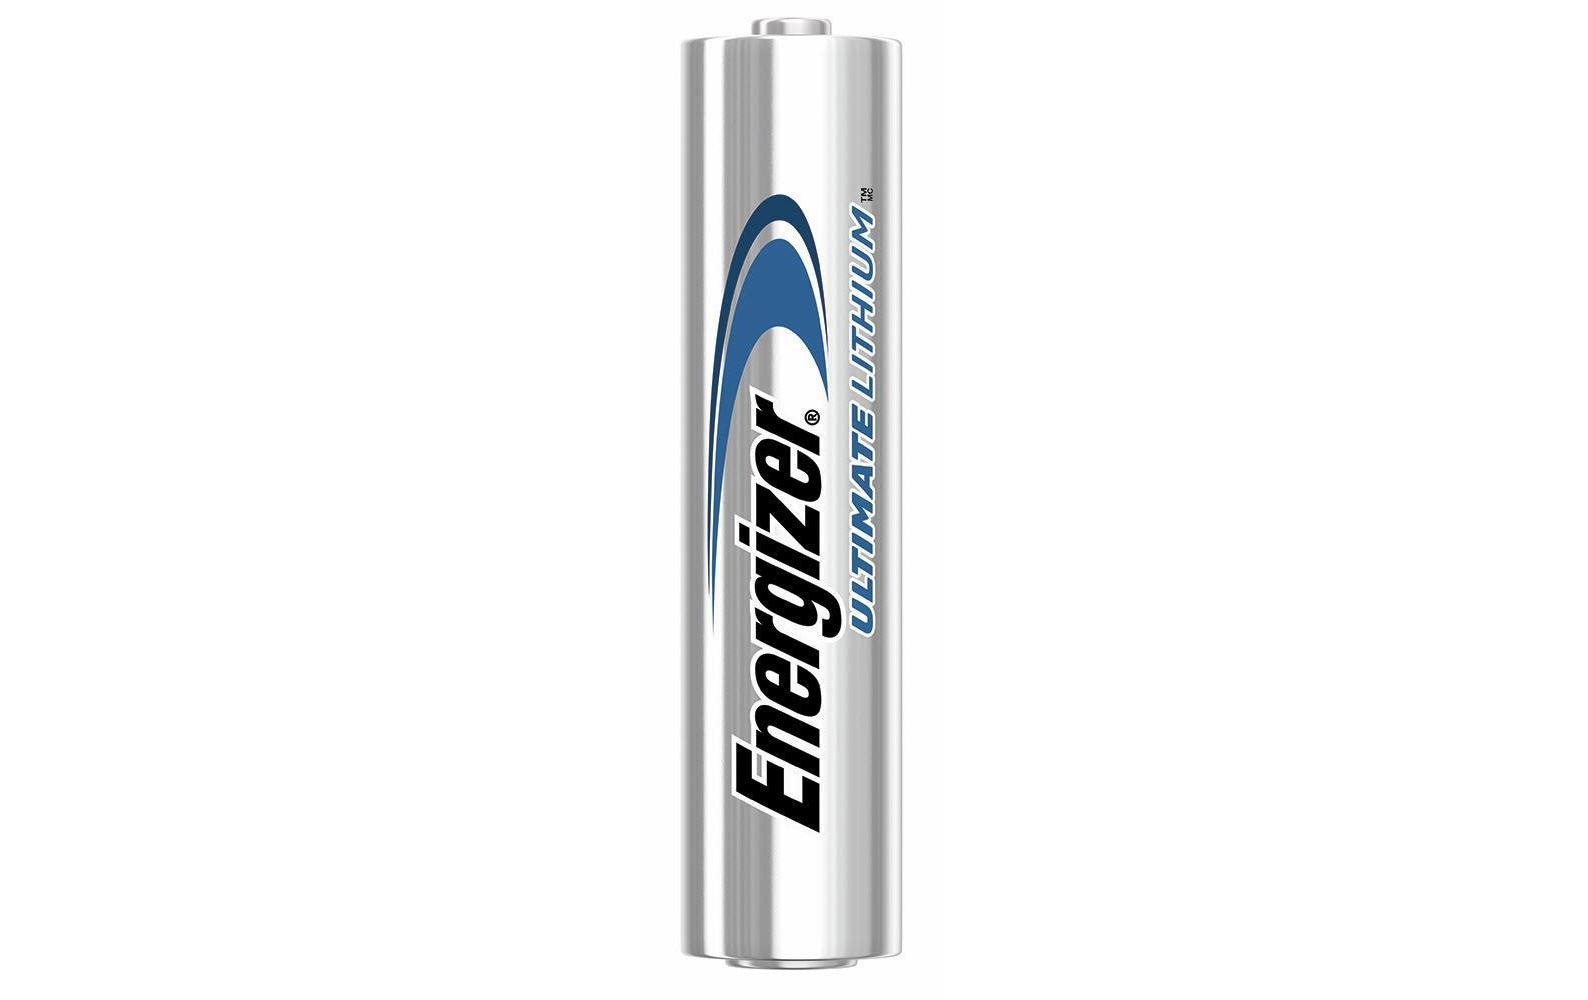 Energizer Batterie »Ultimate Lithium«